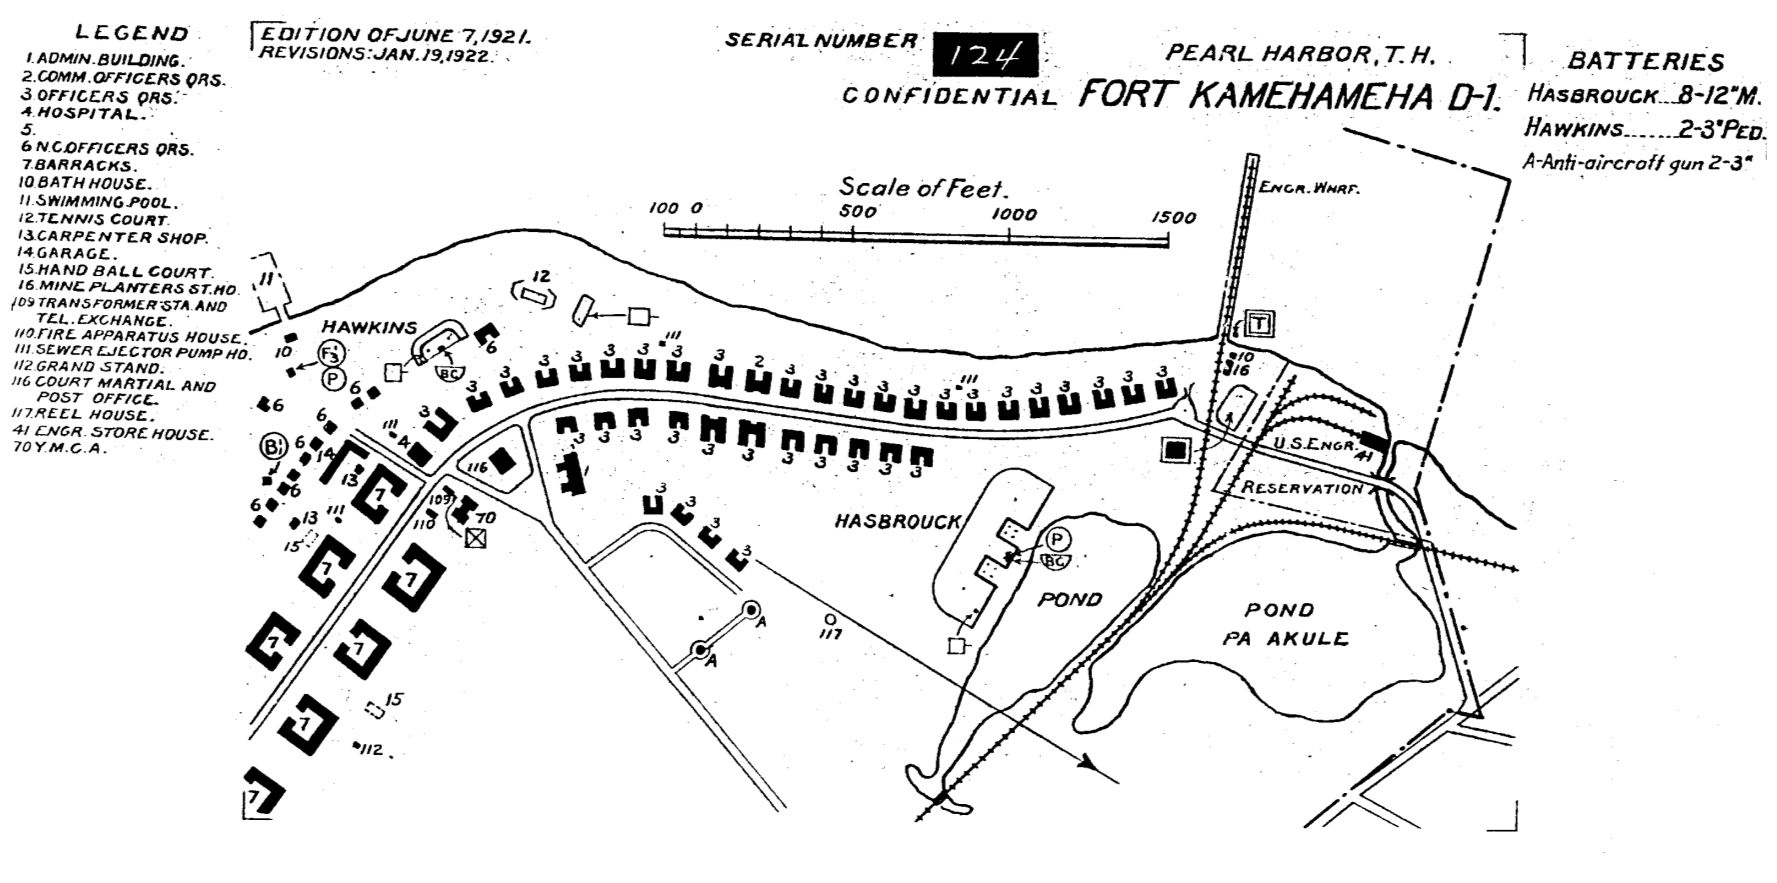 Plan of the western end of Fort Kamehameha at the entrance to Pearl Harbor, Oahu, Hawaii, 19 Jan 1922.